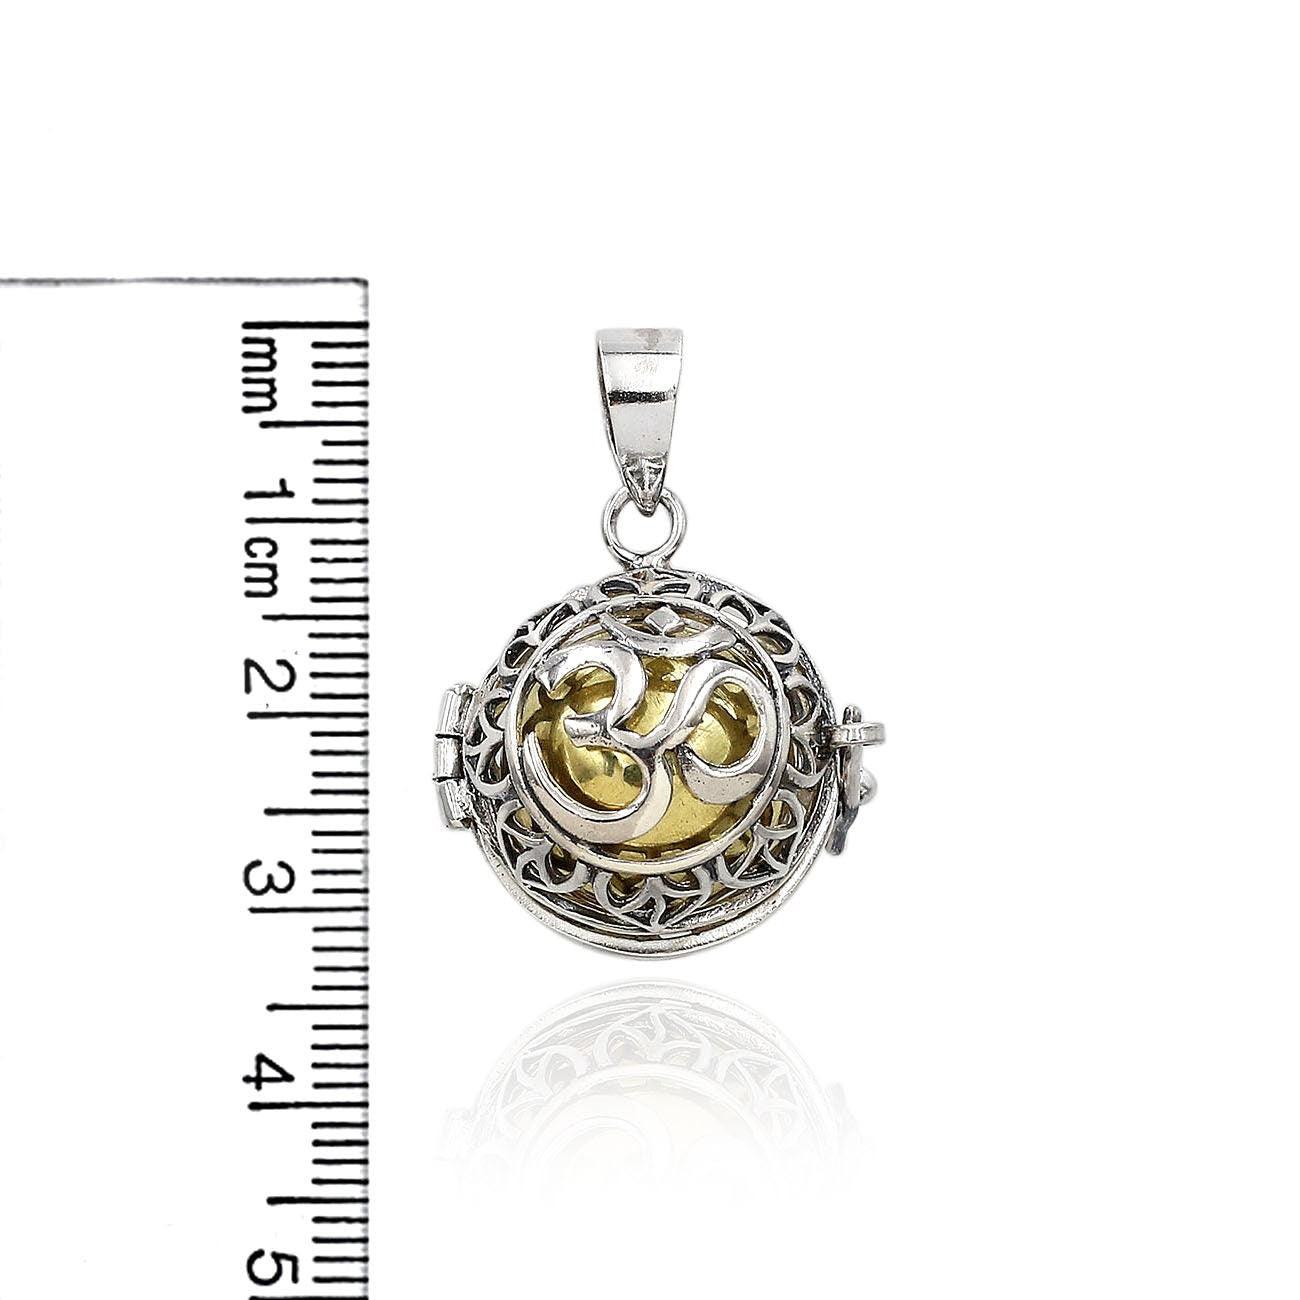 OM Meditation 925 Sterling Silver Harmony Ball Pendant Necklace with Chain - 3.0 Cm - Inspiring Jewellery